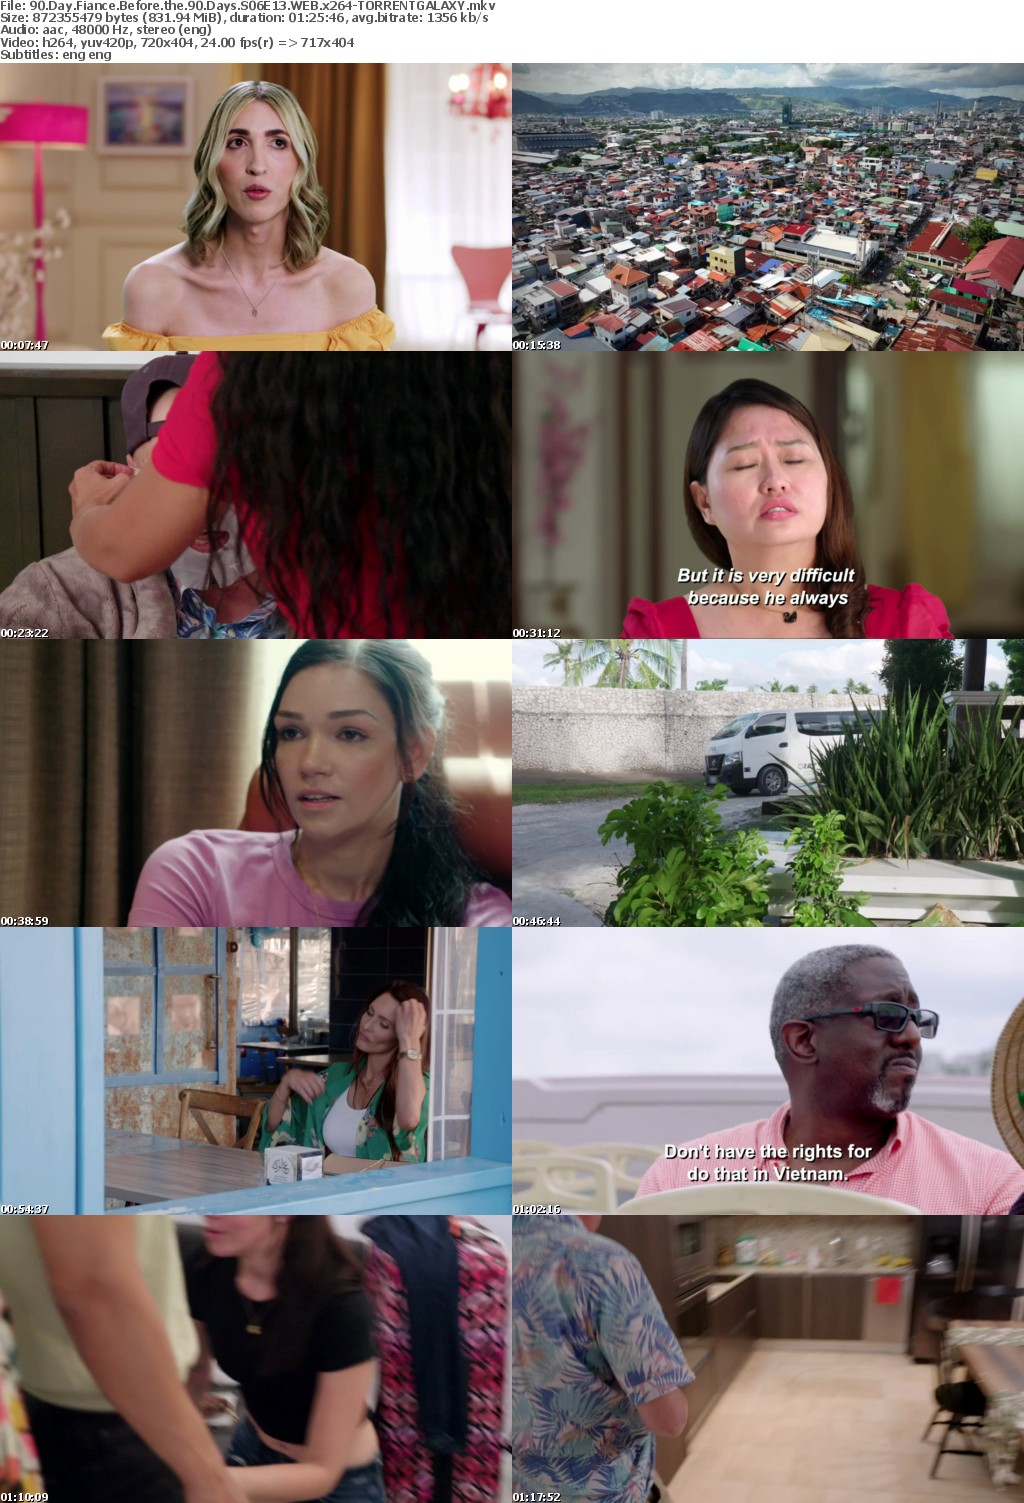 90 Day Fiance Before the 90 Days S06E13 WEB x264-GALAXY